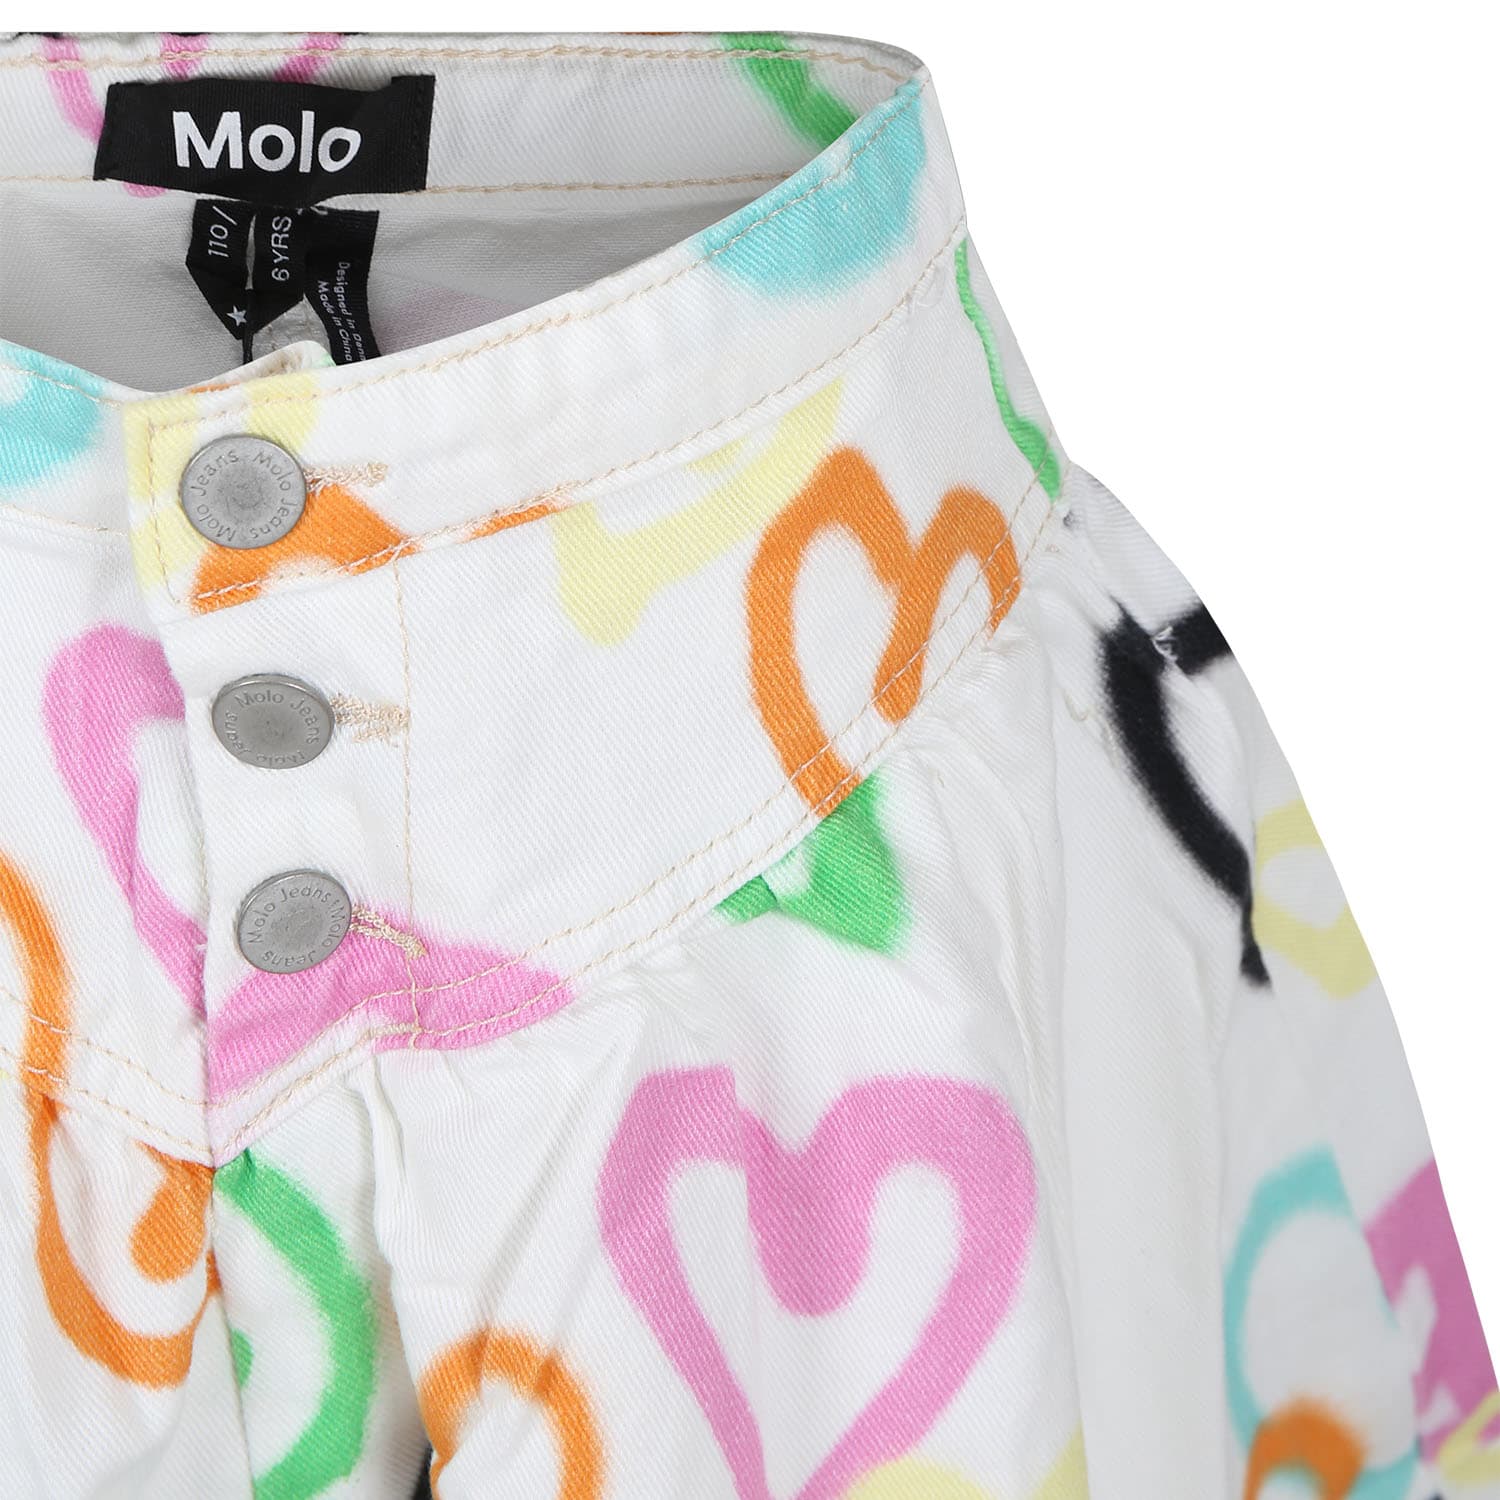 Shop Molo White Skirt For Girl With Hearts Print